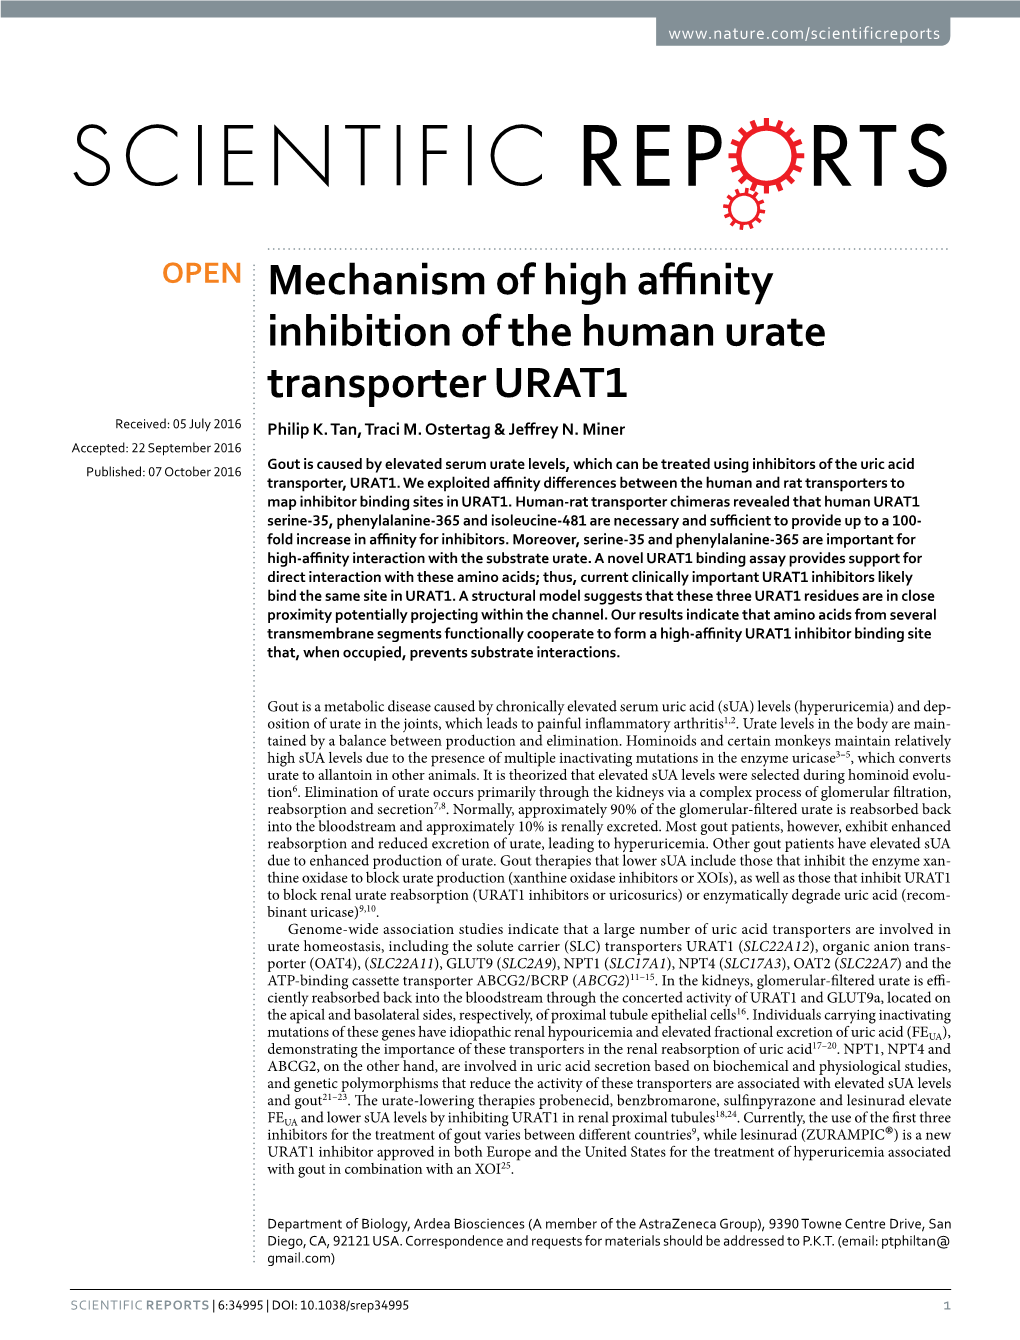 Mechanism of High Affinity Inhibition of the Human Urate Transporter URAT1 Received: 05 July 2016 Philip K